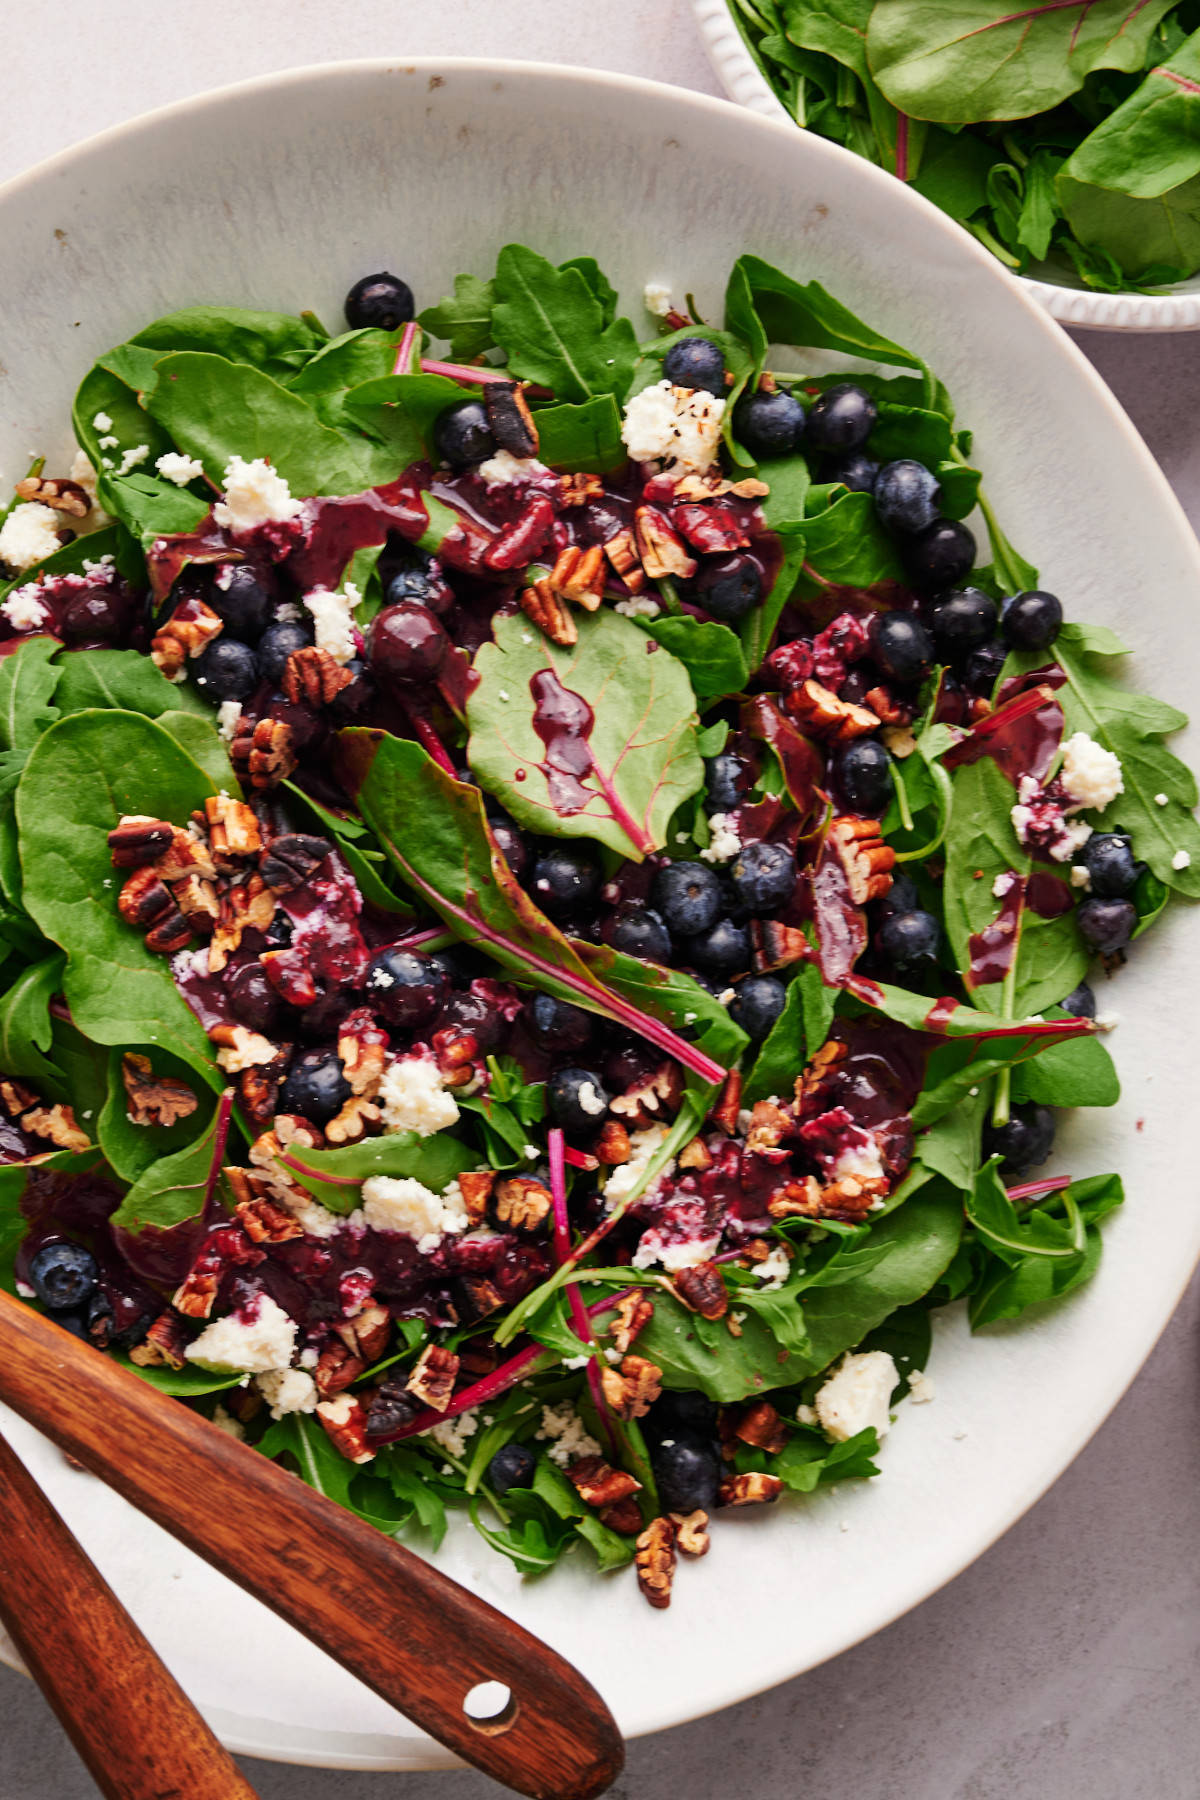 Vertical flat-lay view of summer blueberry salad with blueberries, feta, and toasted pecans in a white bowl with wooden utensils.